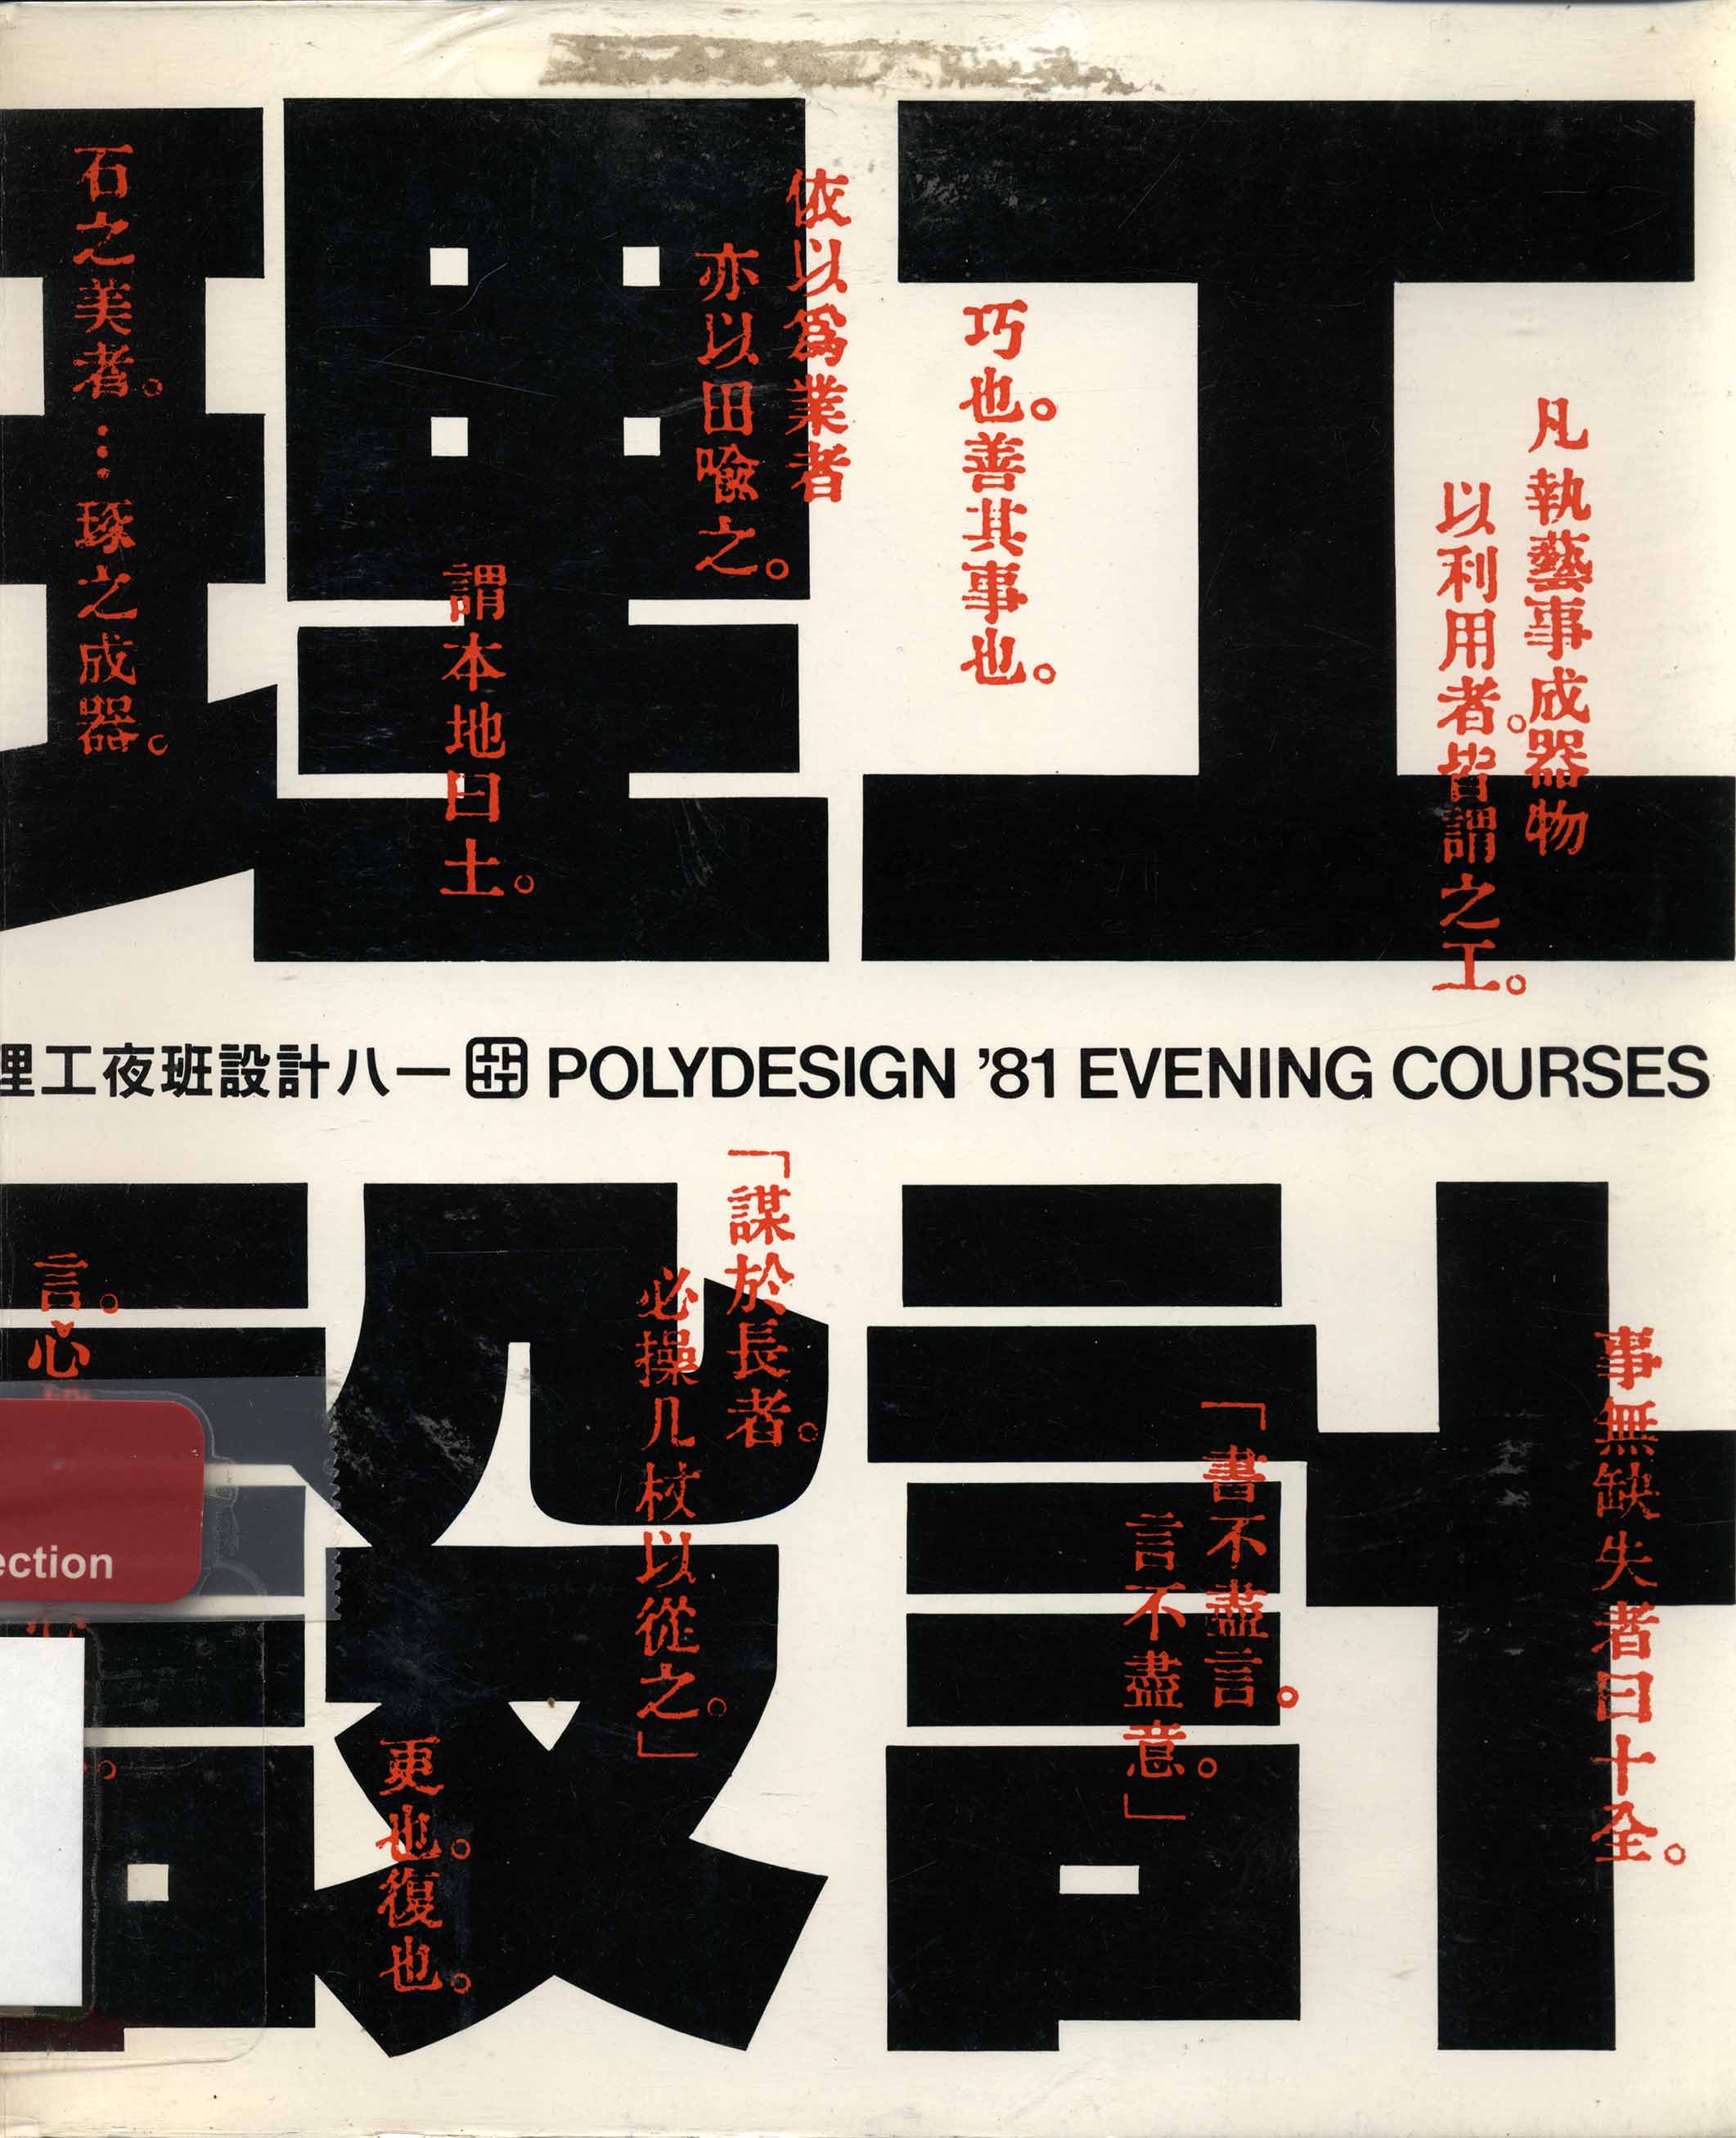 Polydesign '81 Evening Courses